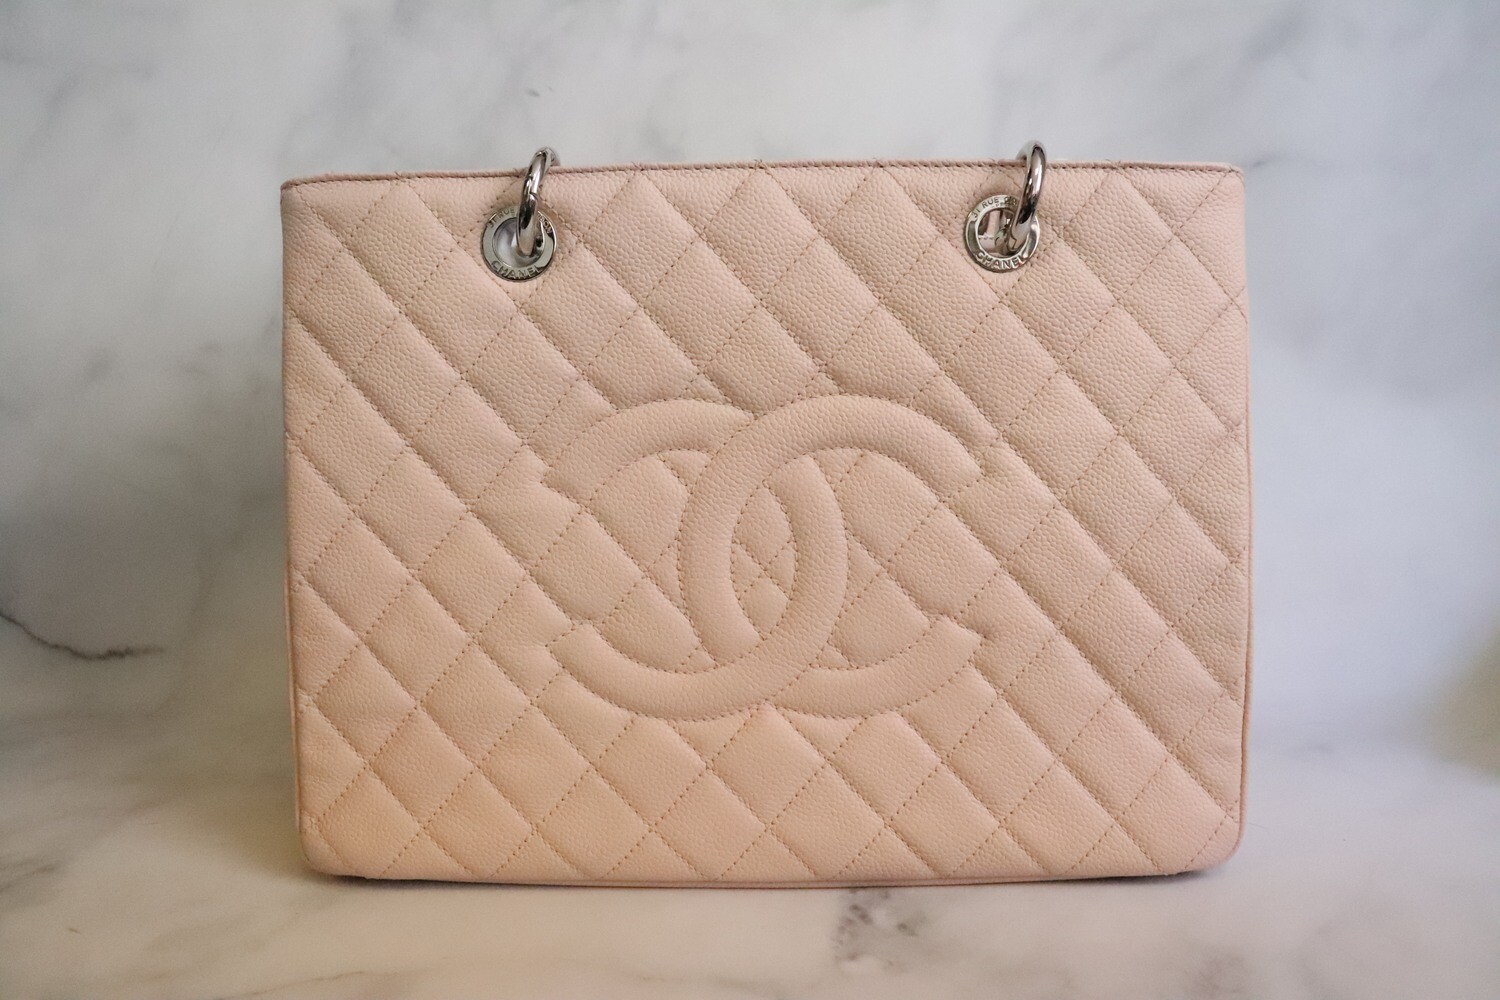 Chanel Grand Shopping Tote Bag (GST), Pink Caviar Leather, Silver Hardware,  Preowned in Dustbag